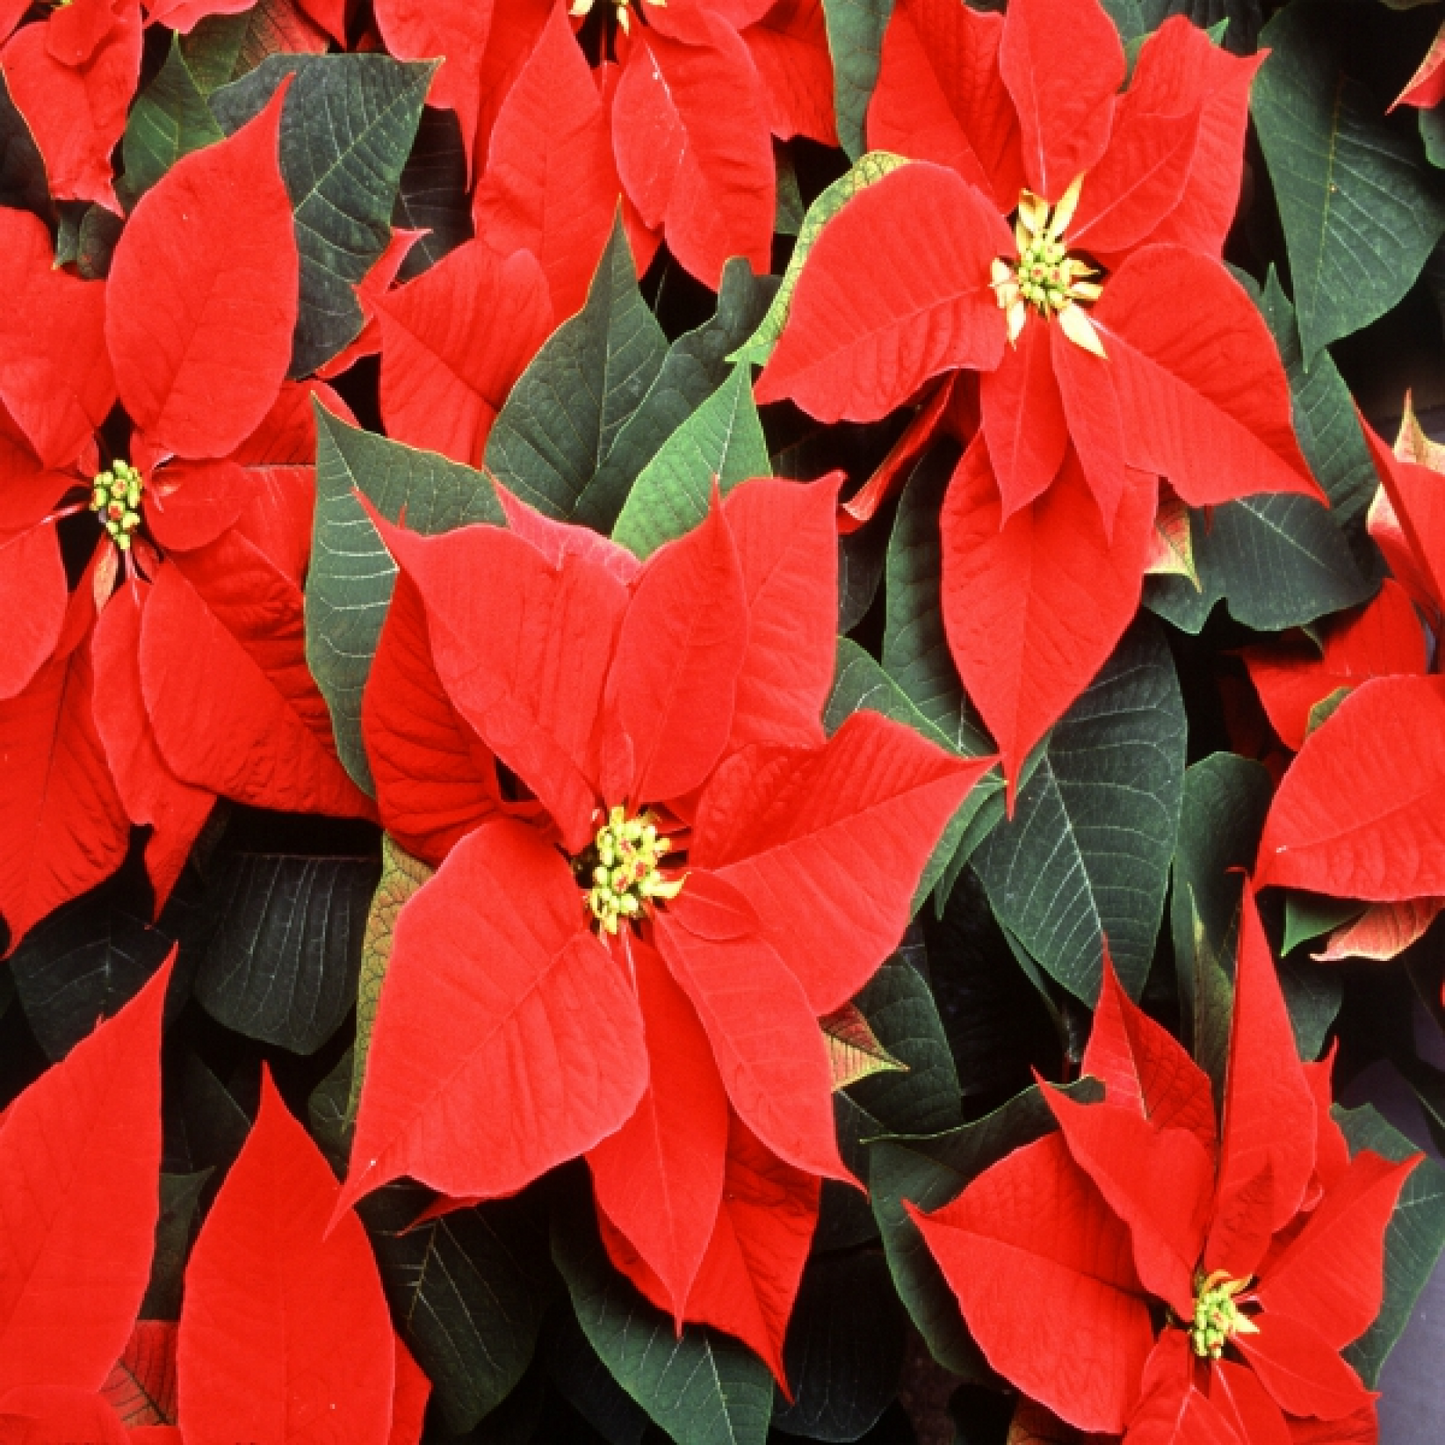 Poinsettia Christmas Flower (Any color) Plant